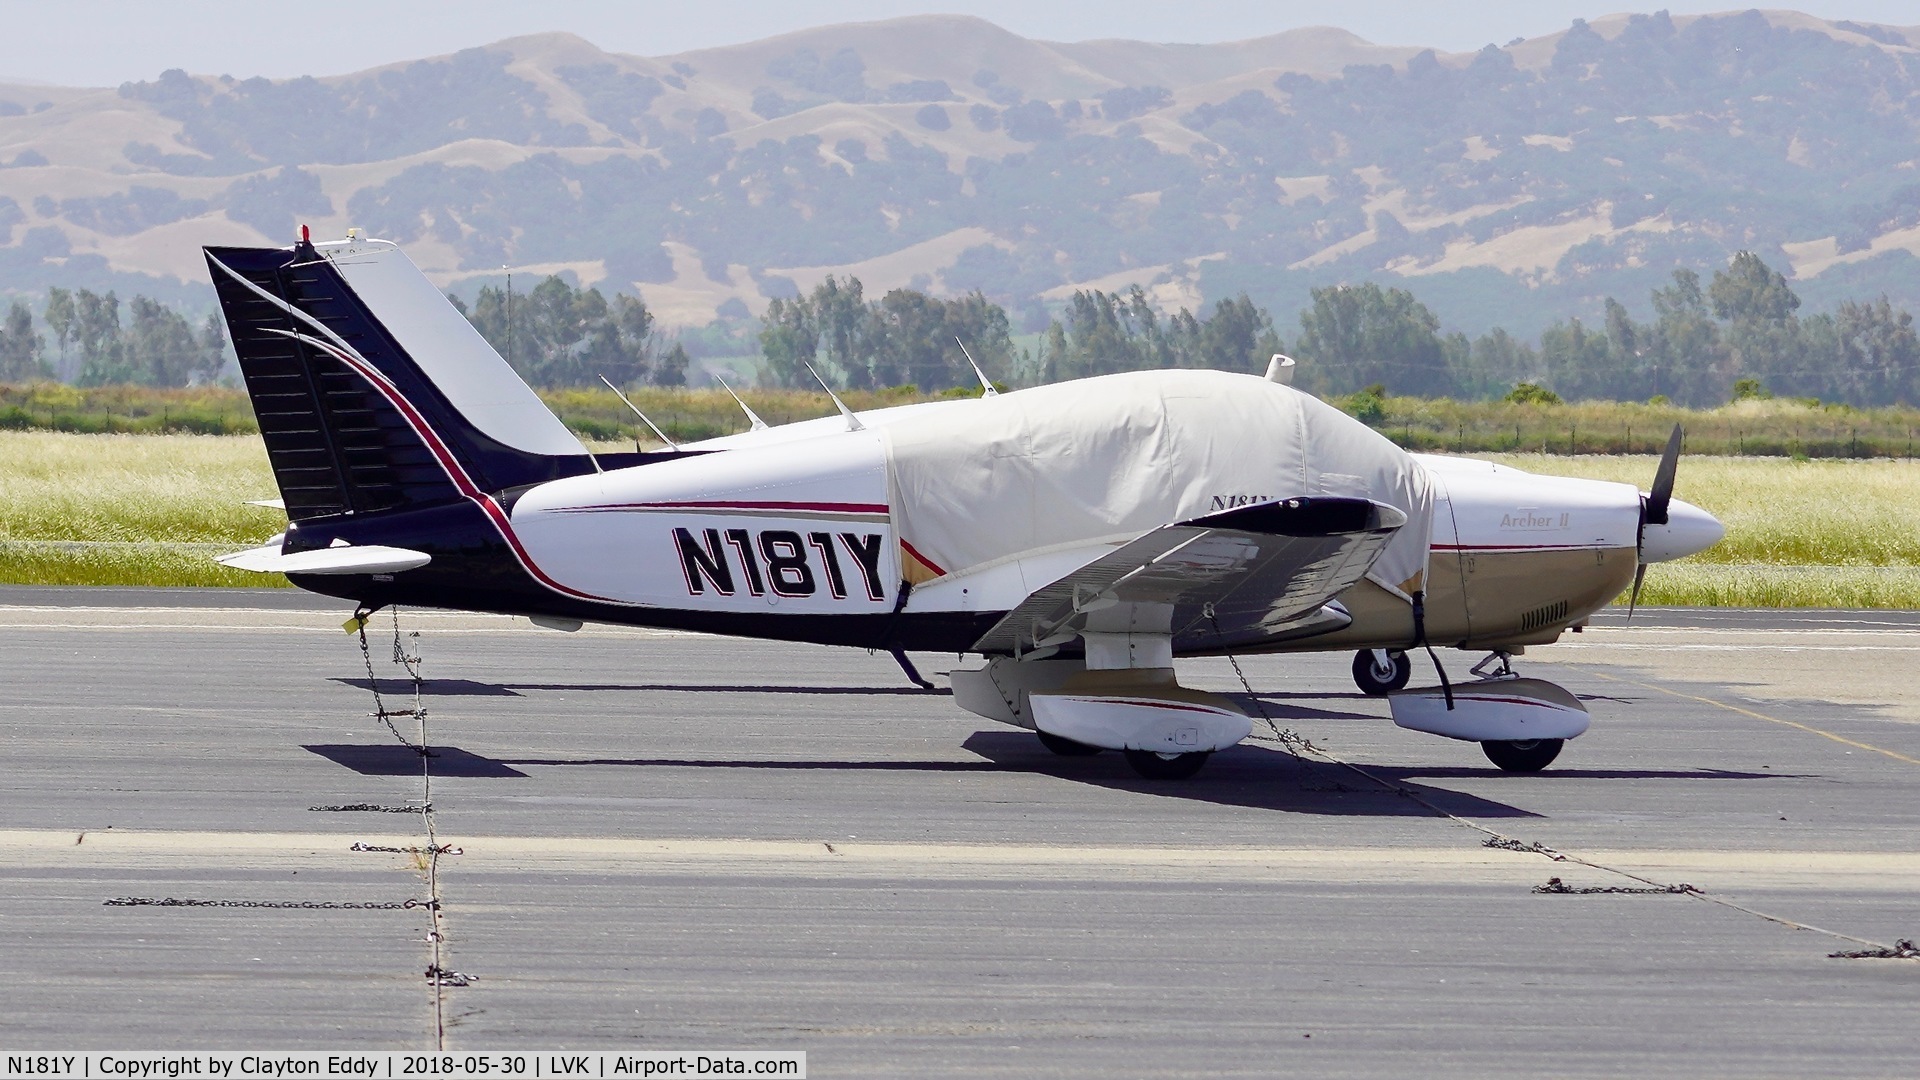 N181Y, 1985 Piper PA-28-181 Archer C/N 28-8590089, Livermore Airport California 2018.